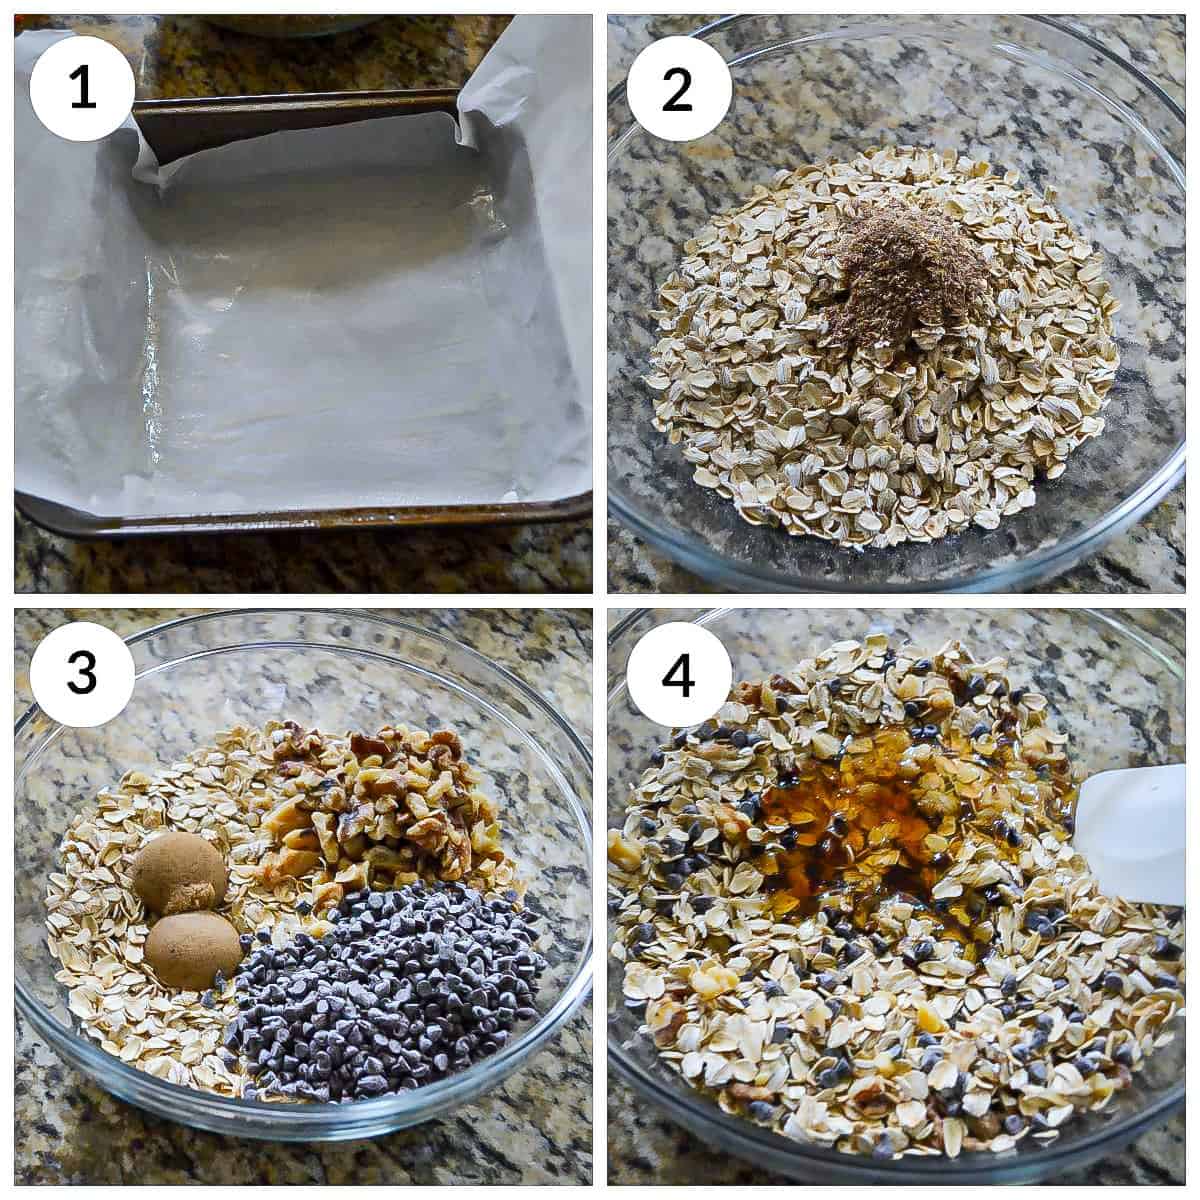 Mixing dry and wet ingredients for making chocolate chip granola bars